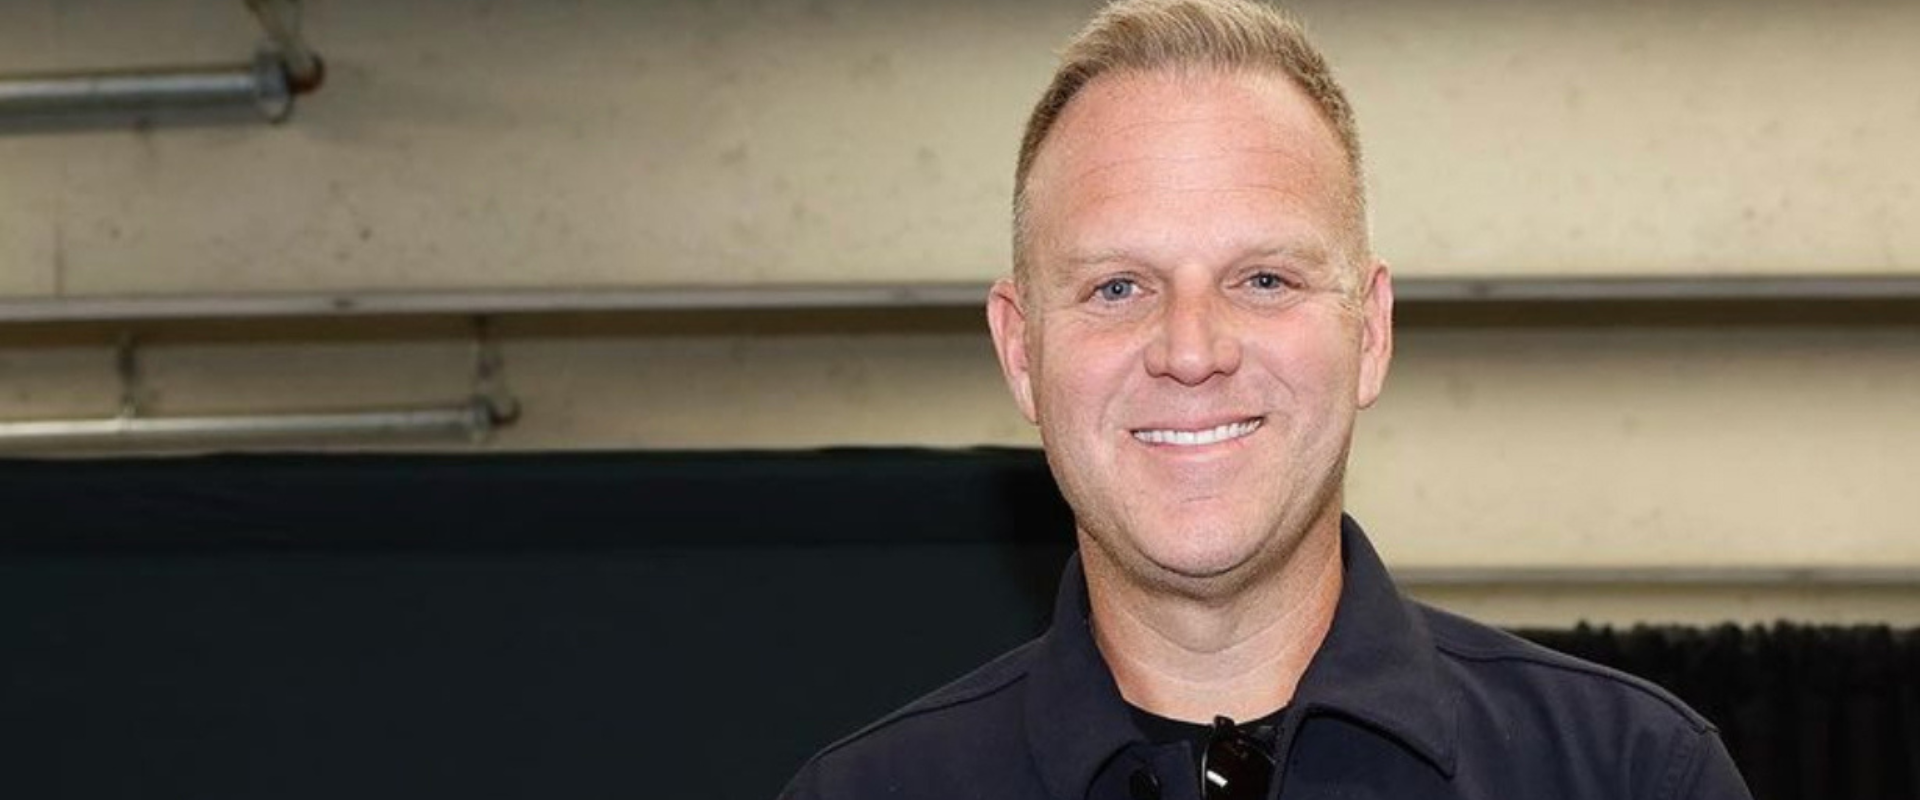 Matthew West Shares About His Recent Car Accident